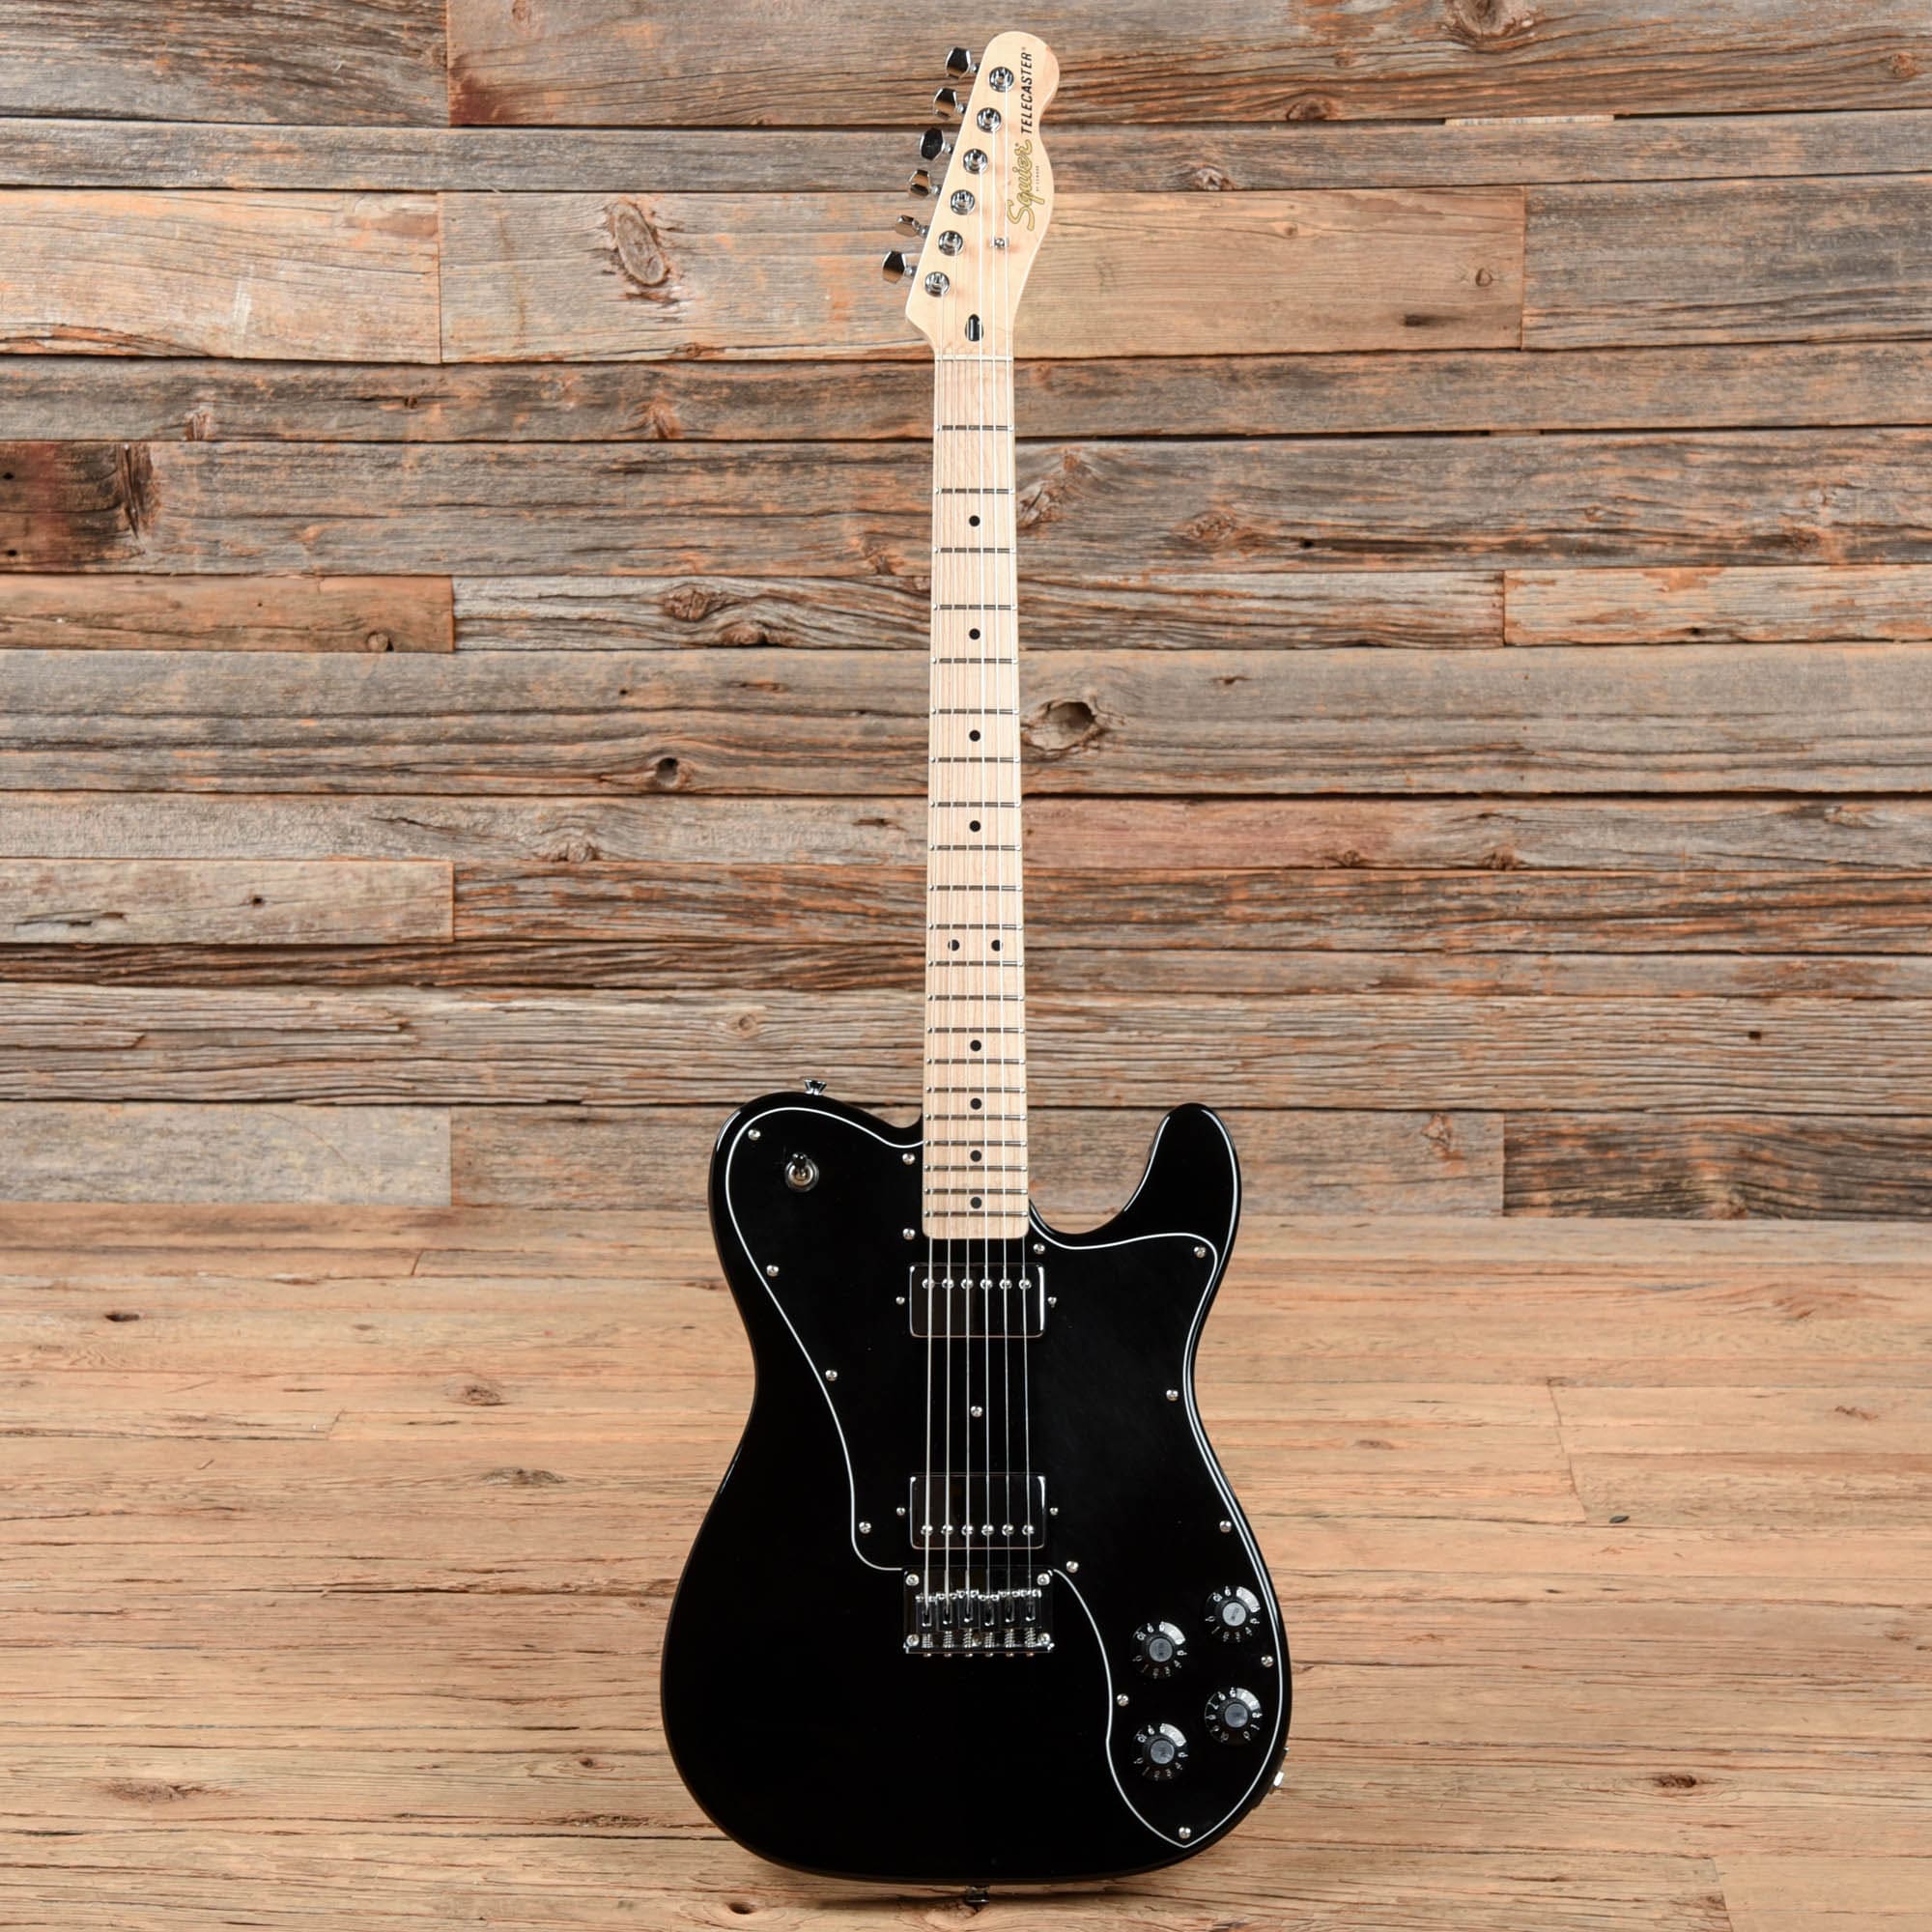 Fender Affinity Telecaster Deluxe Black Electric Guitars / Solid Body